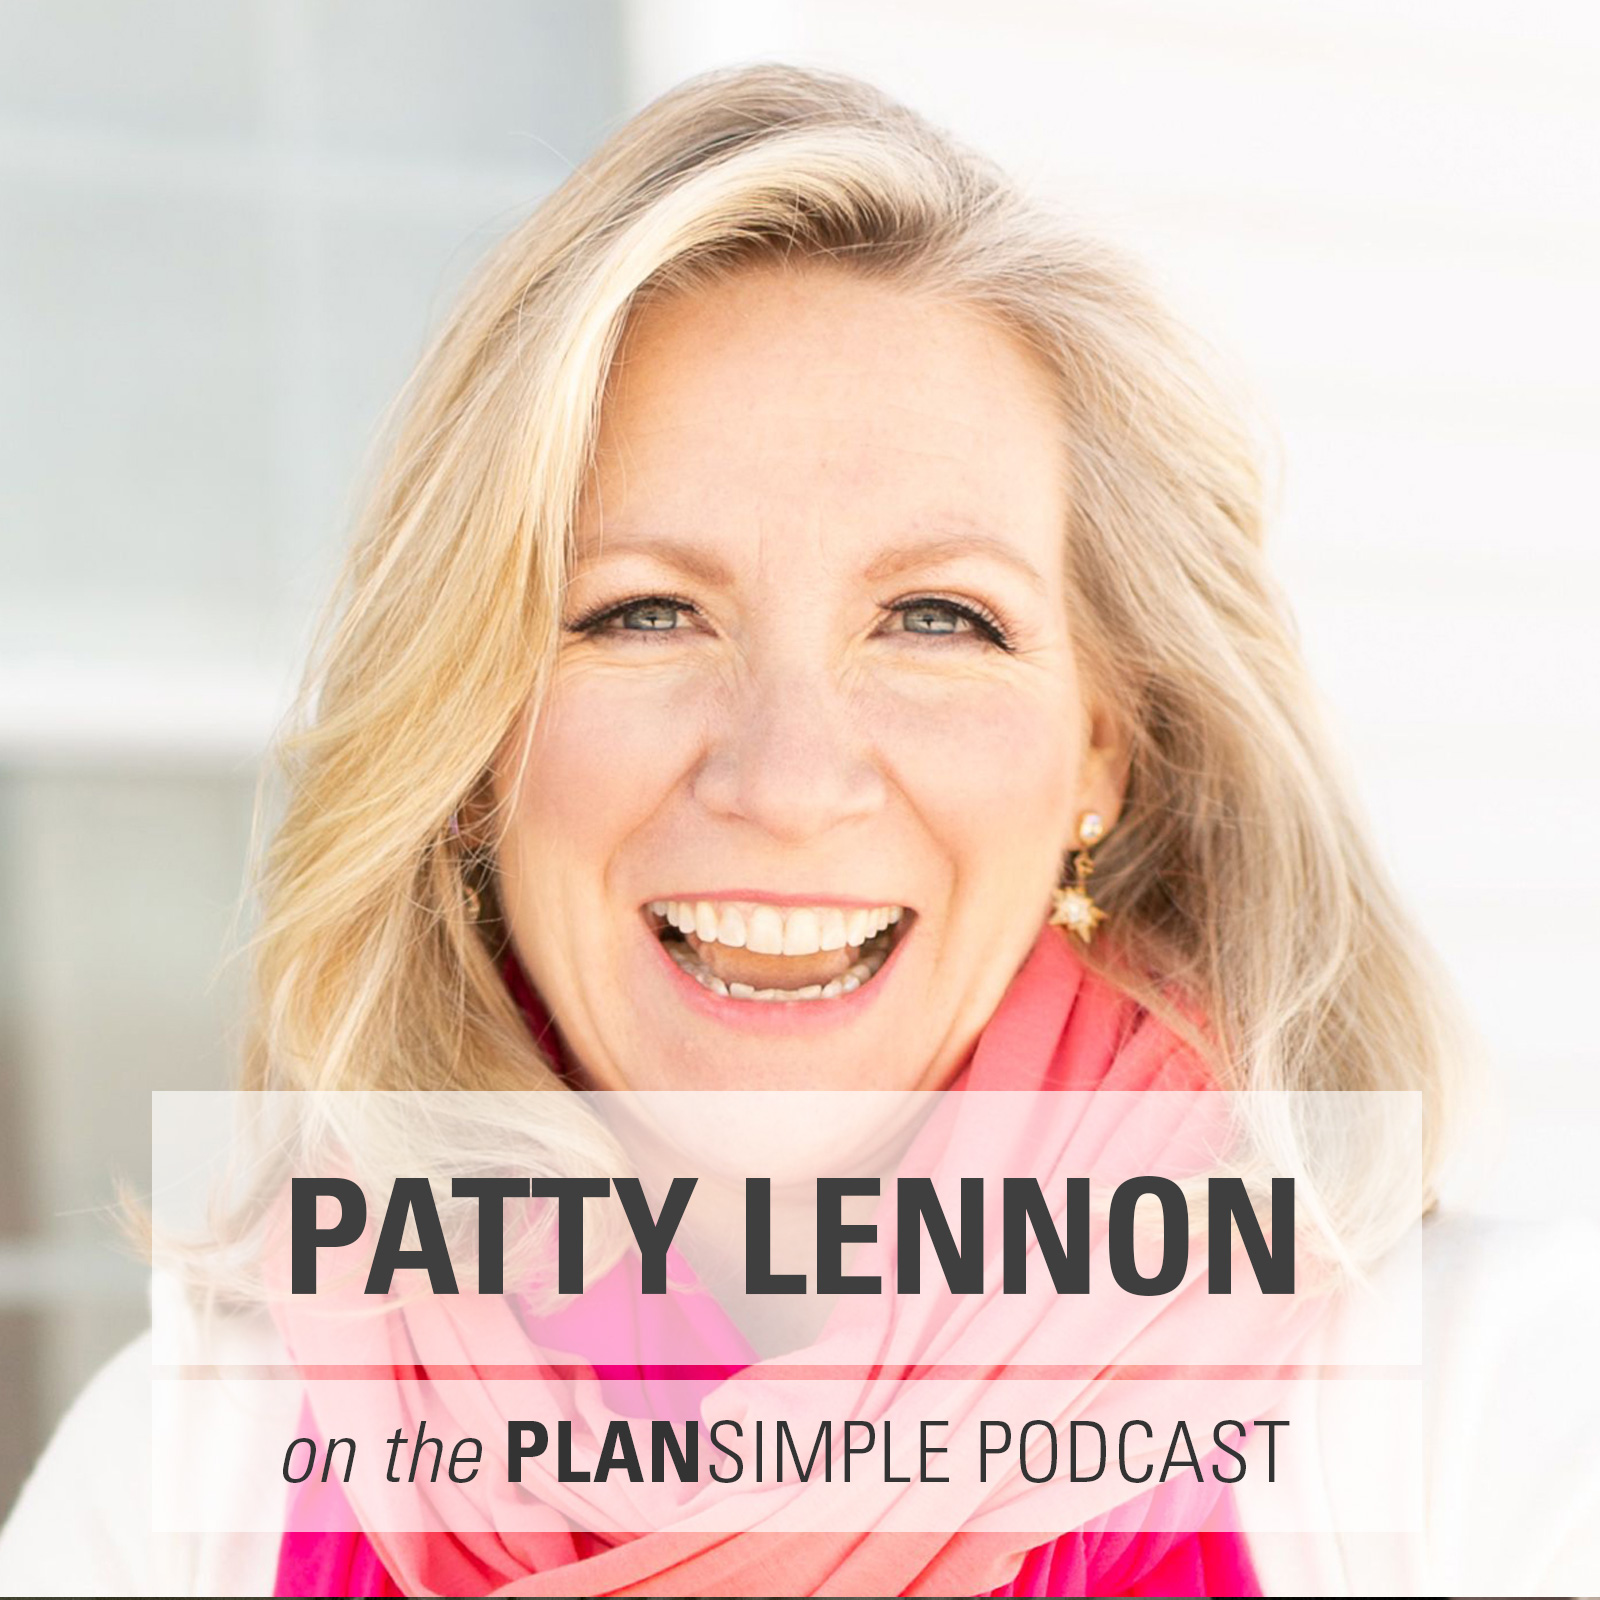 Let Go And Receive With Patty Lennon